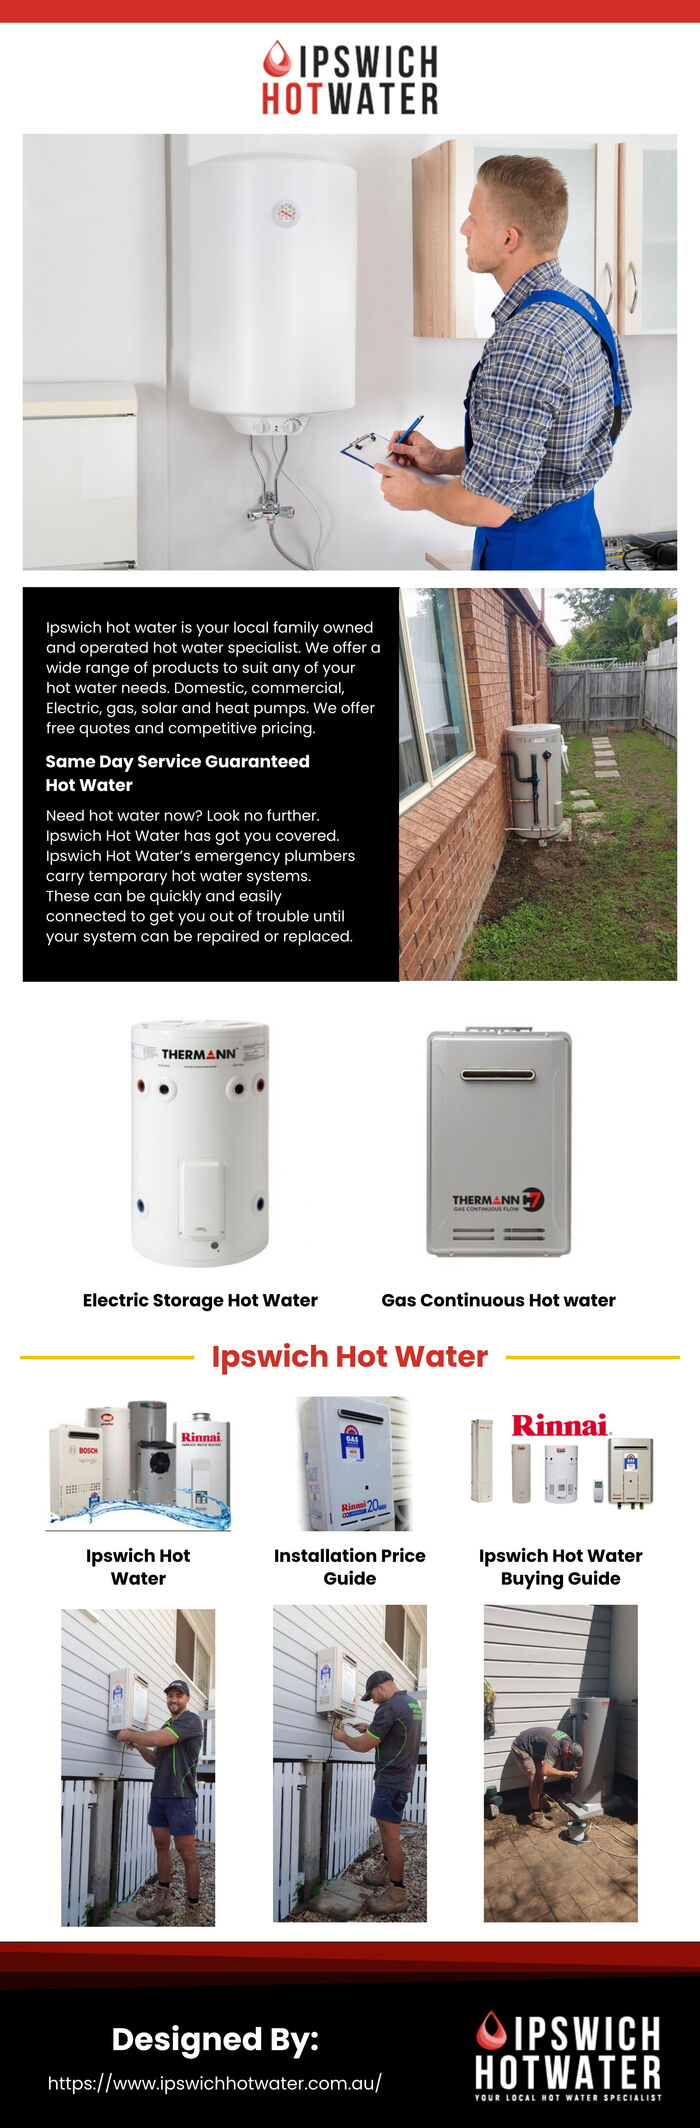 This infographic is designed by Ipswich Hot Water